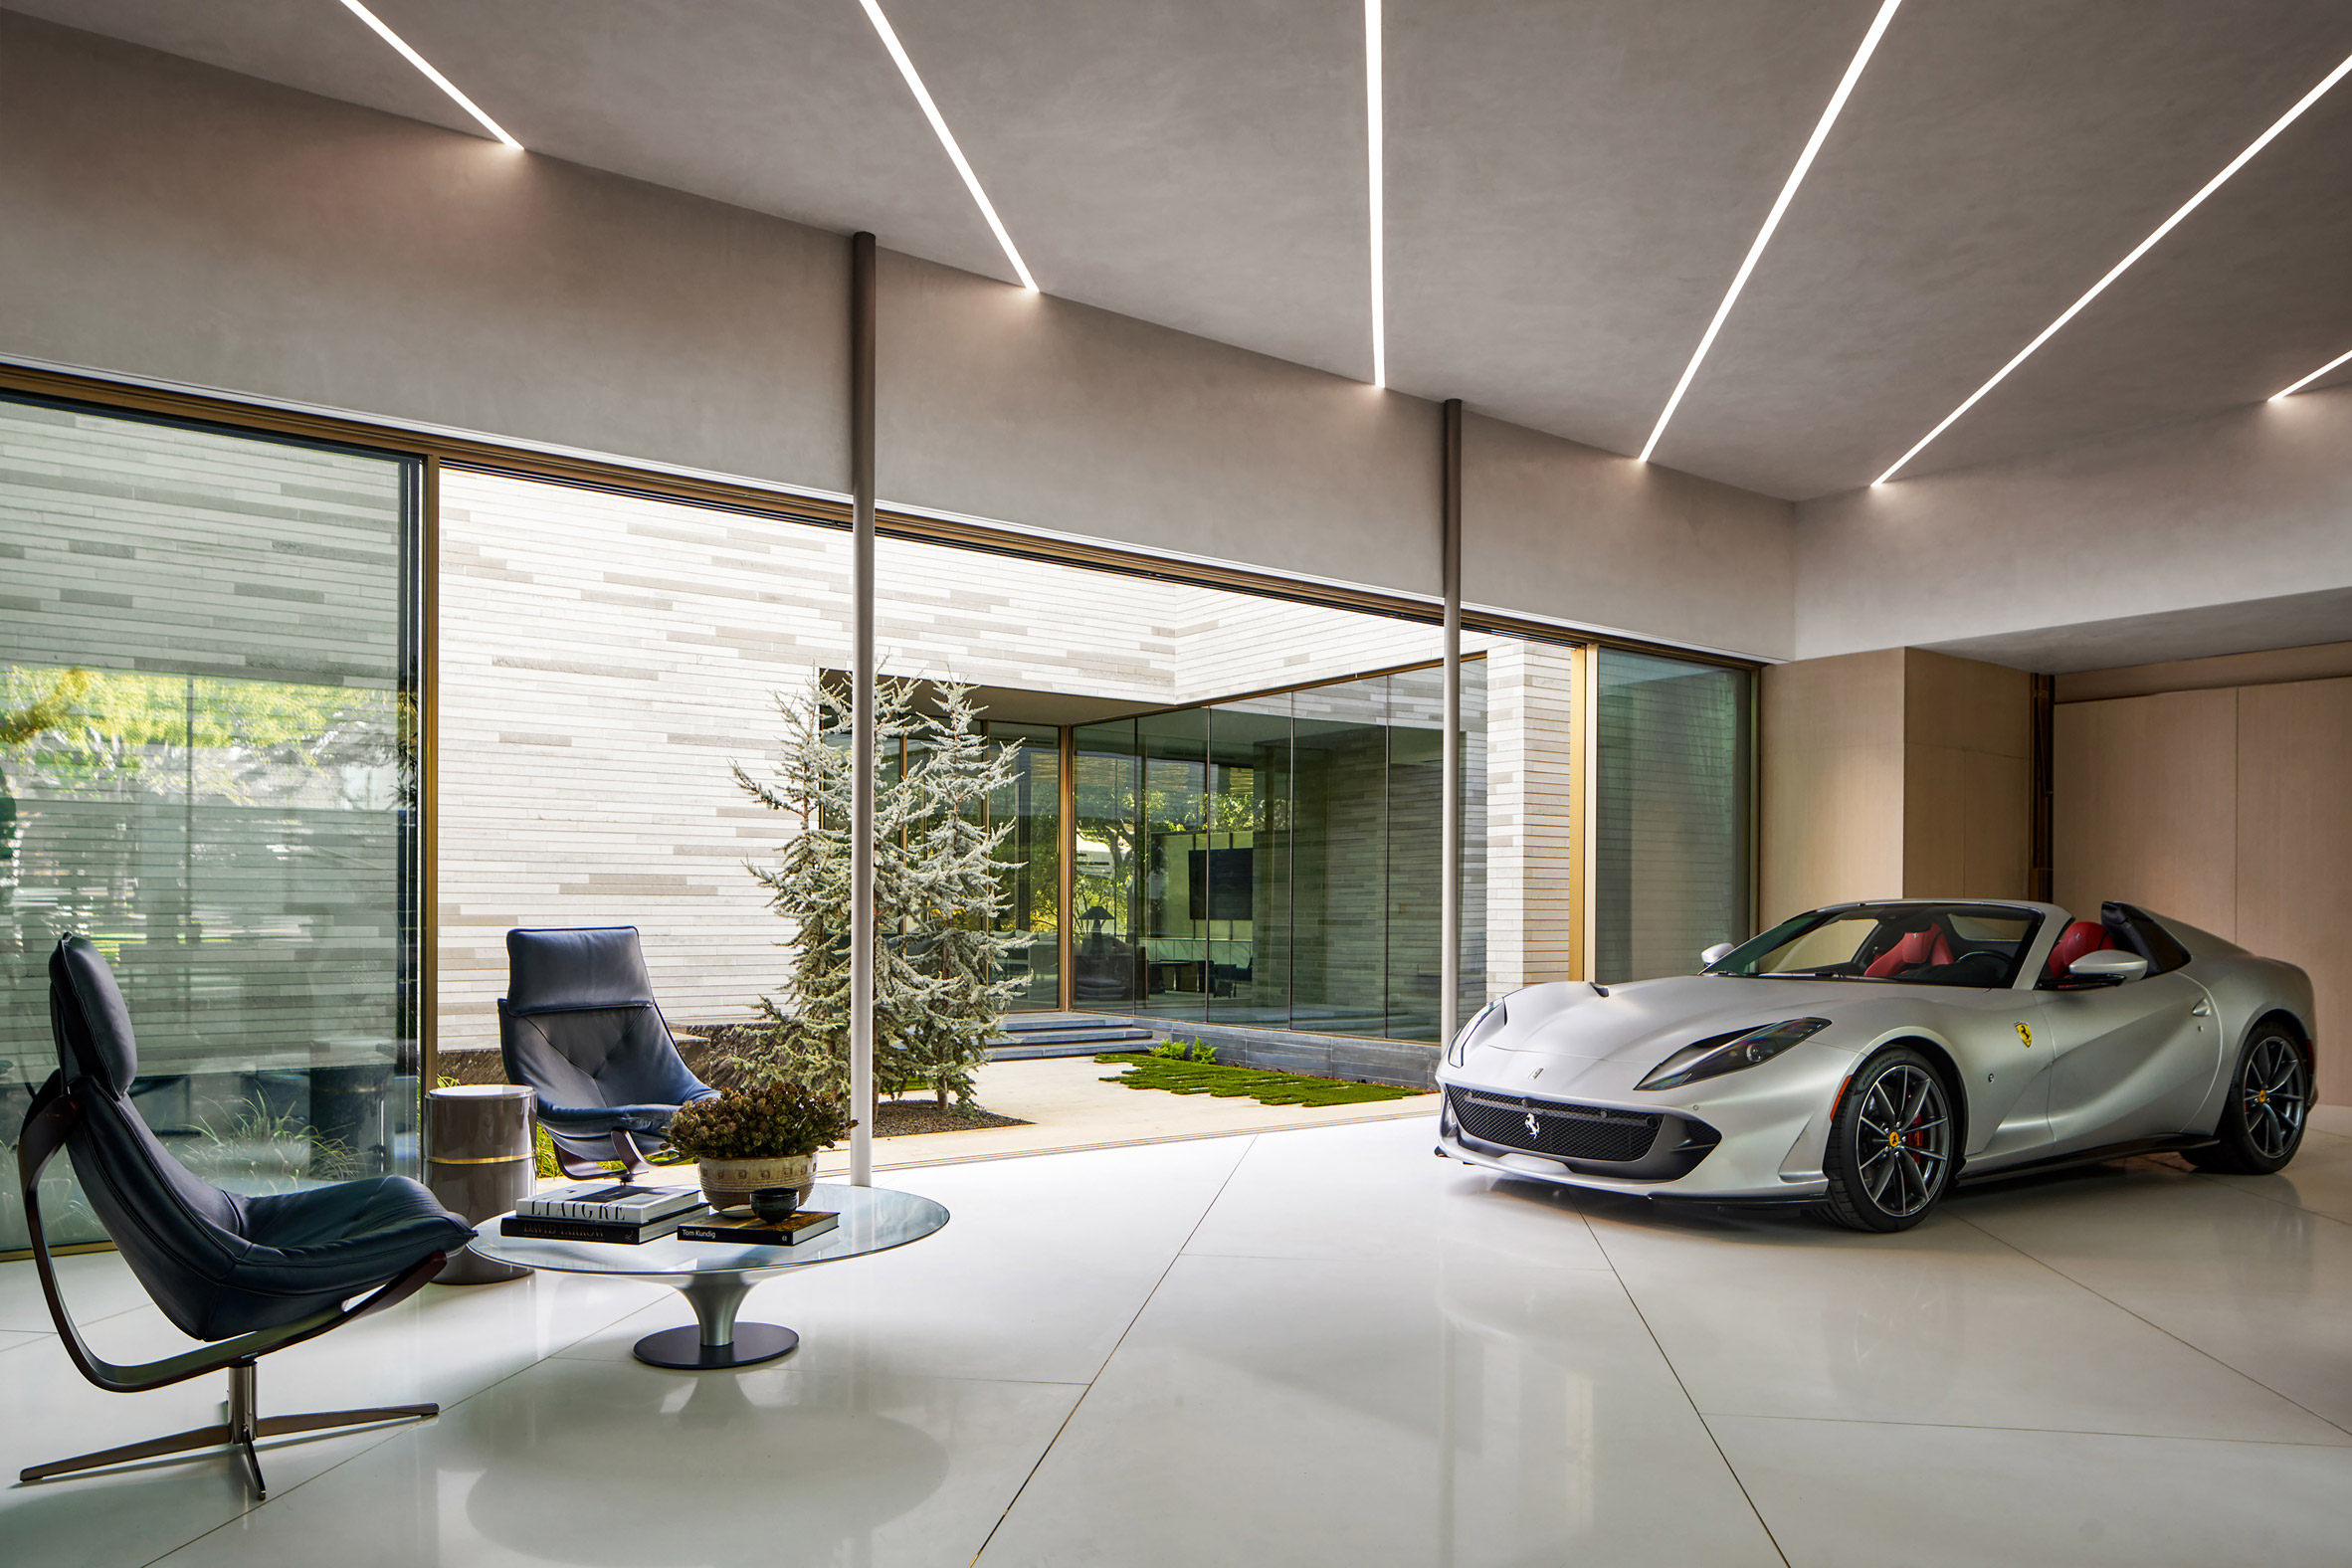 Gallery-like residential space with a Ferrari